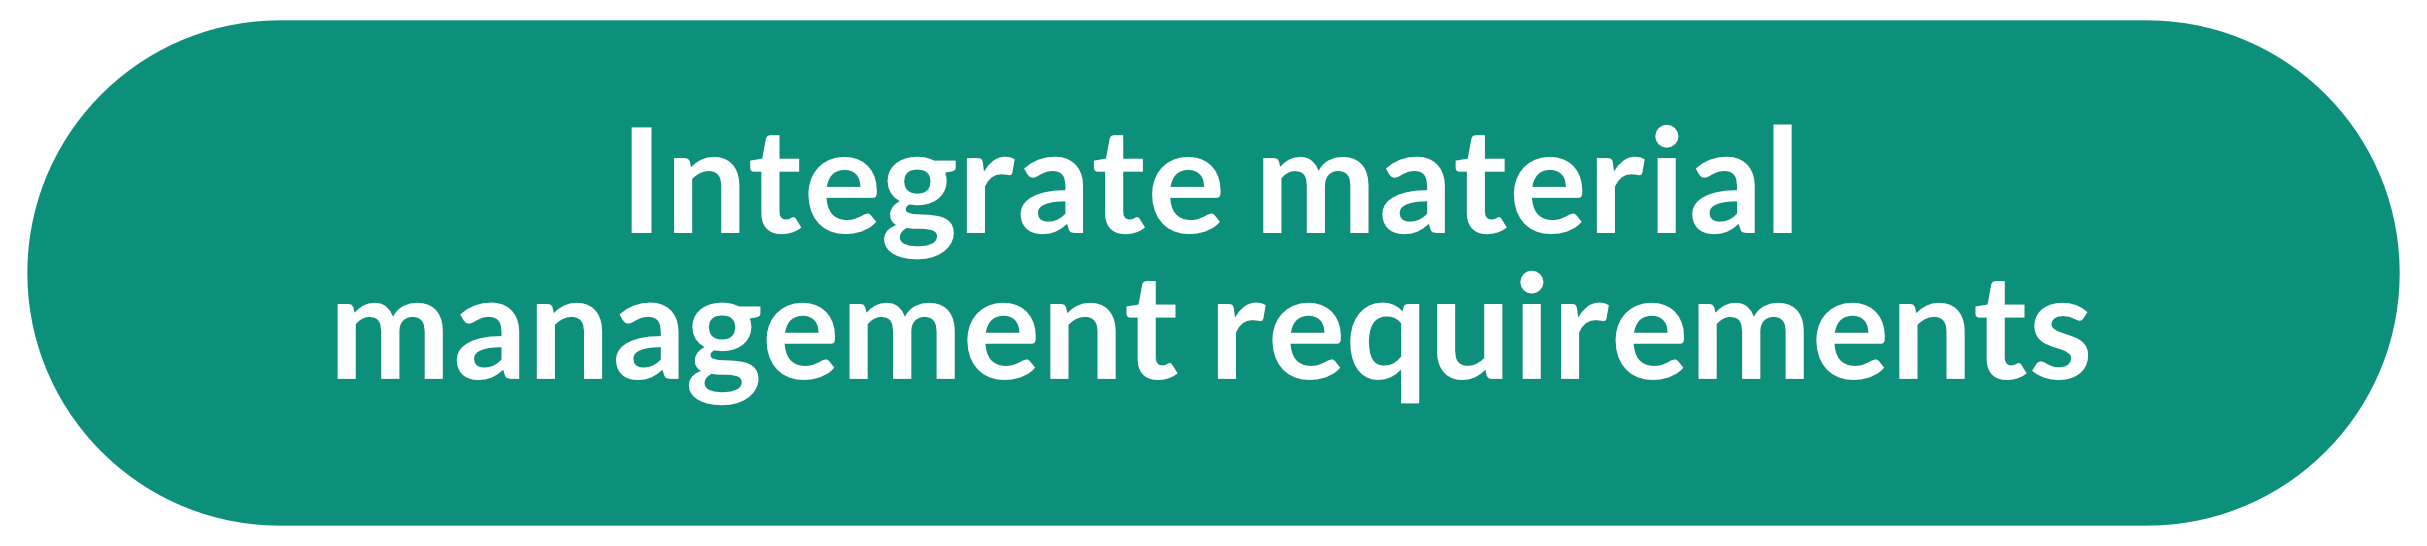 Integrate material management requirements